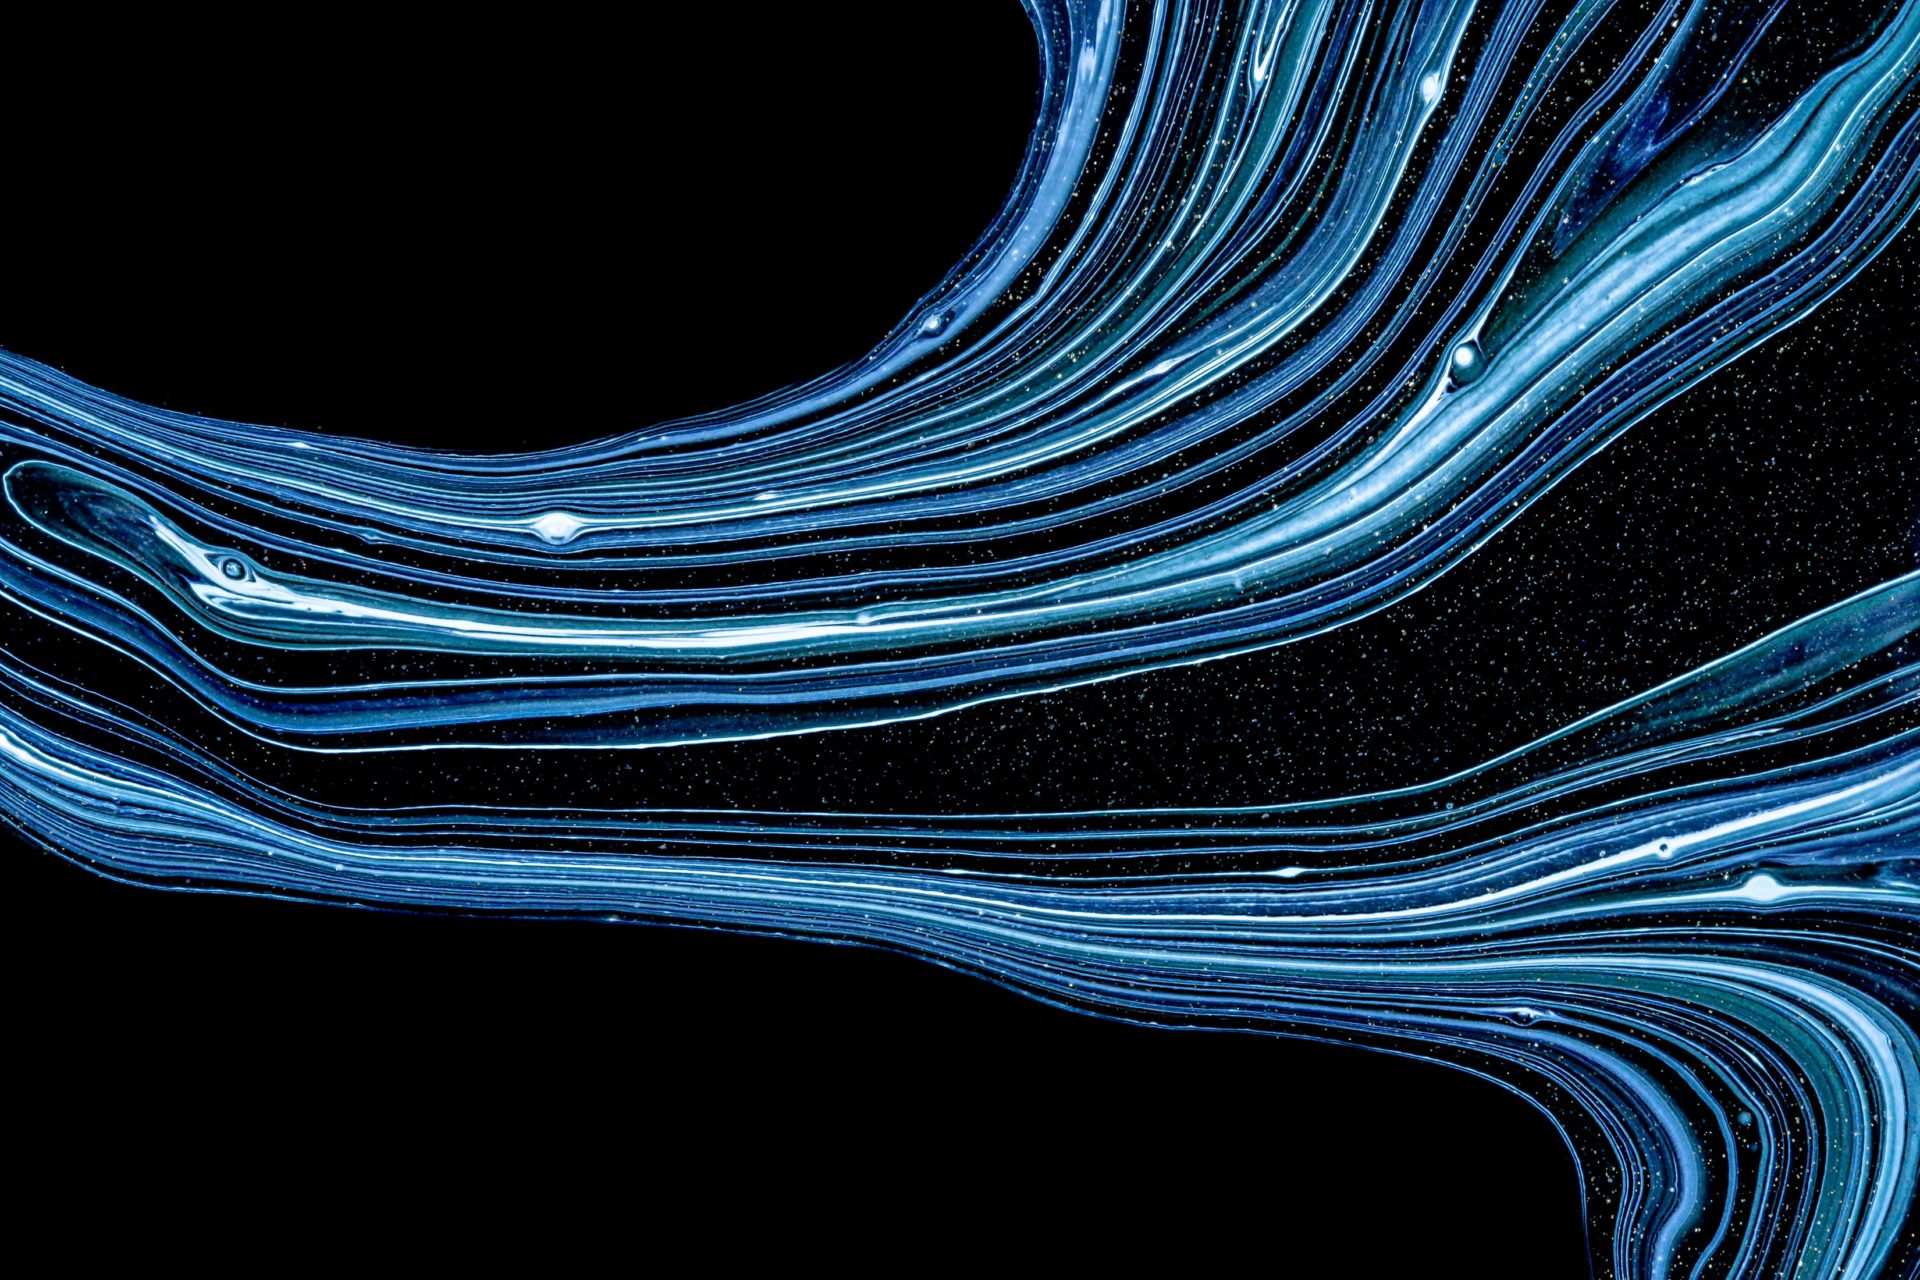 Blue swirling lines on a black background